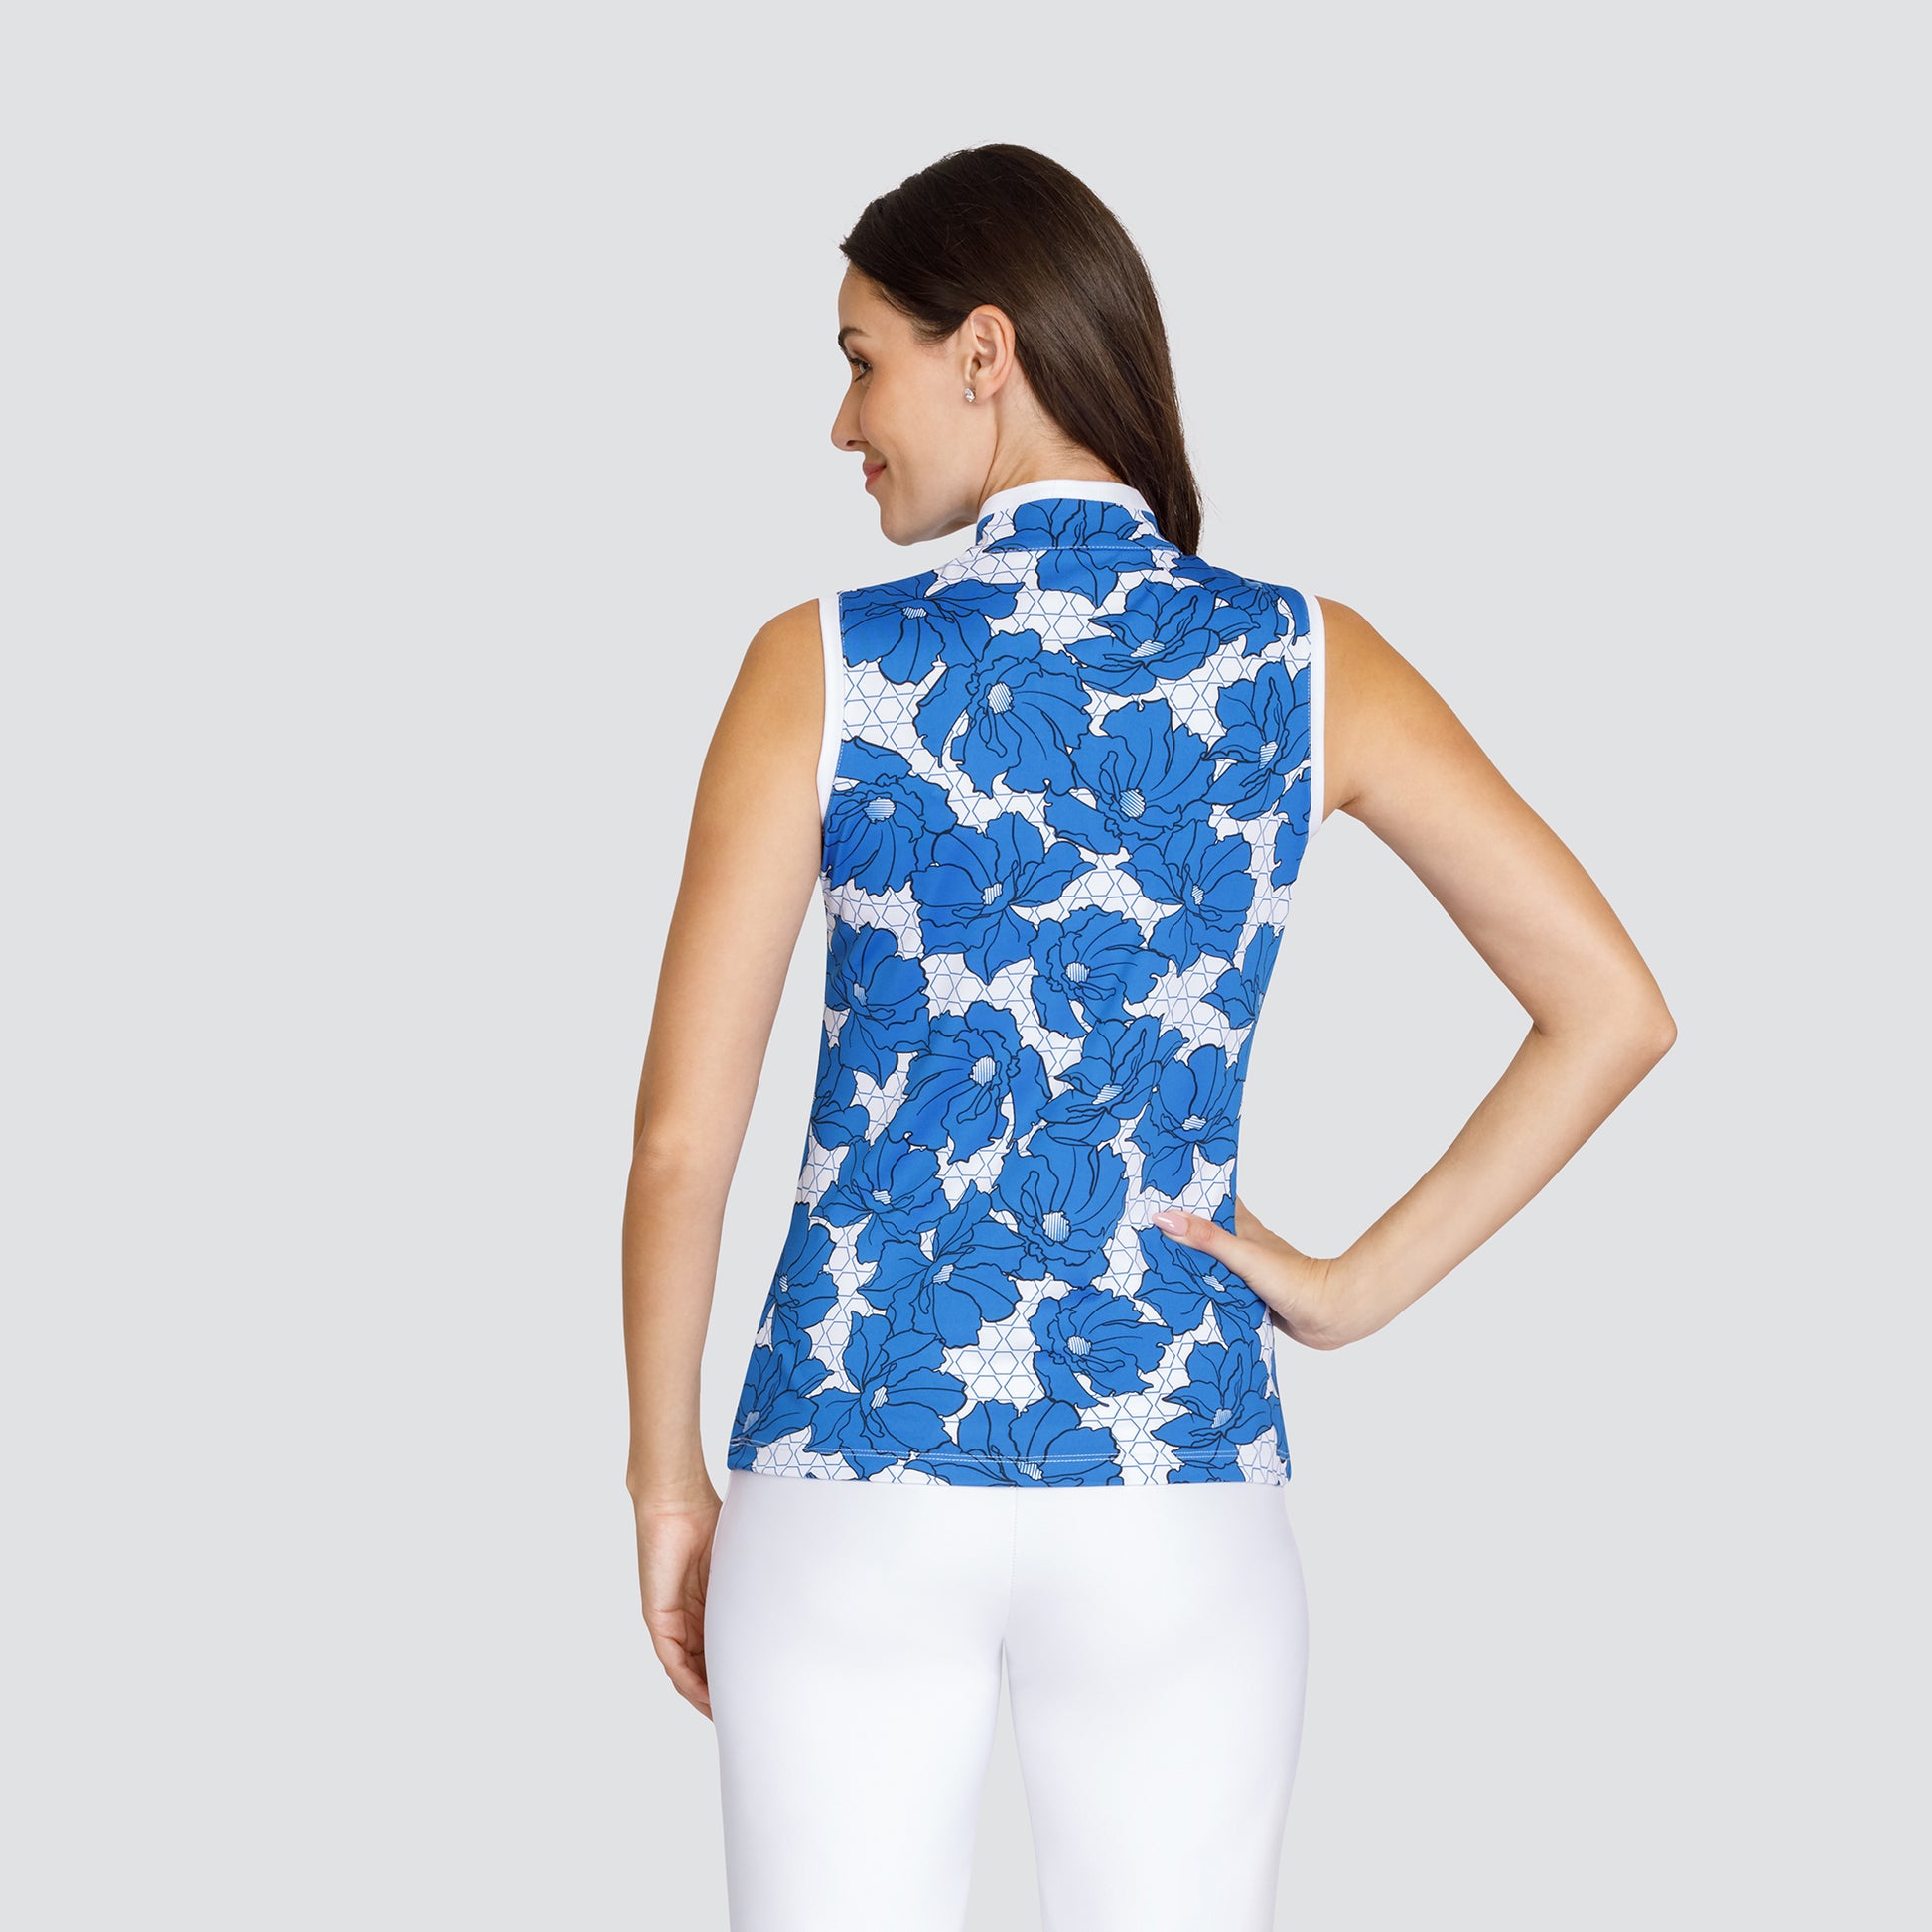 Tail Ladies Sleeveless Polo in a Floral and Hexagonal Print 